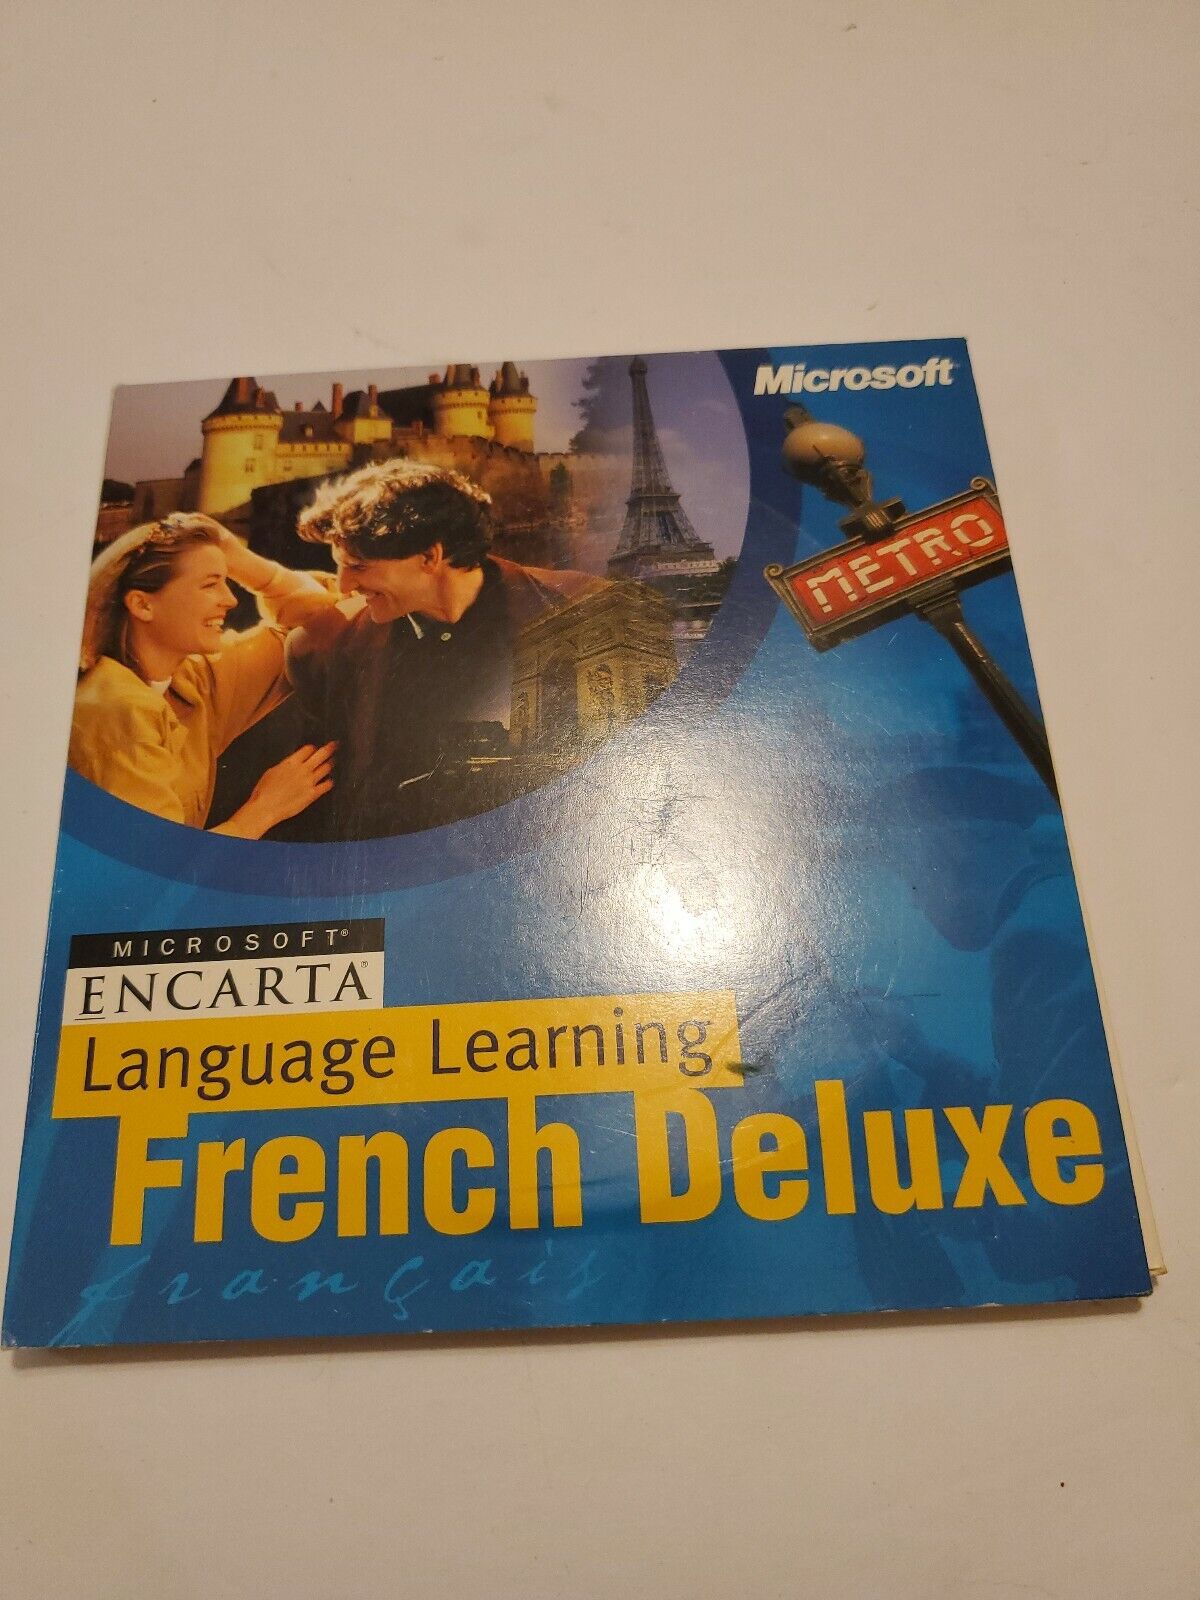 Microsoft Encarta Language Learning: French Deluxe [CD-ROM]